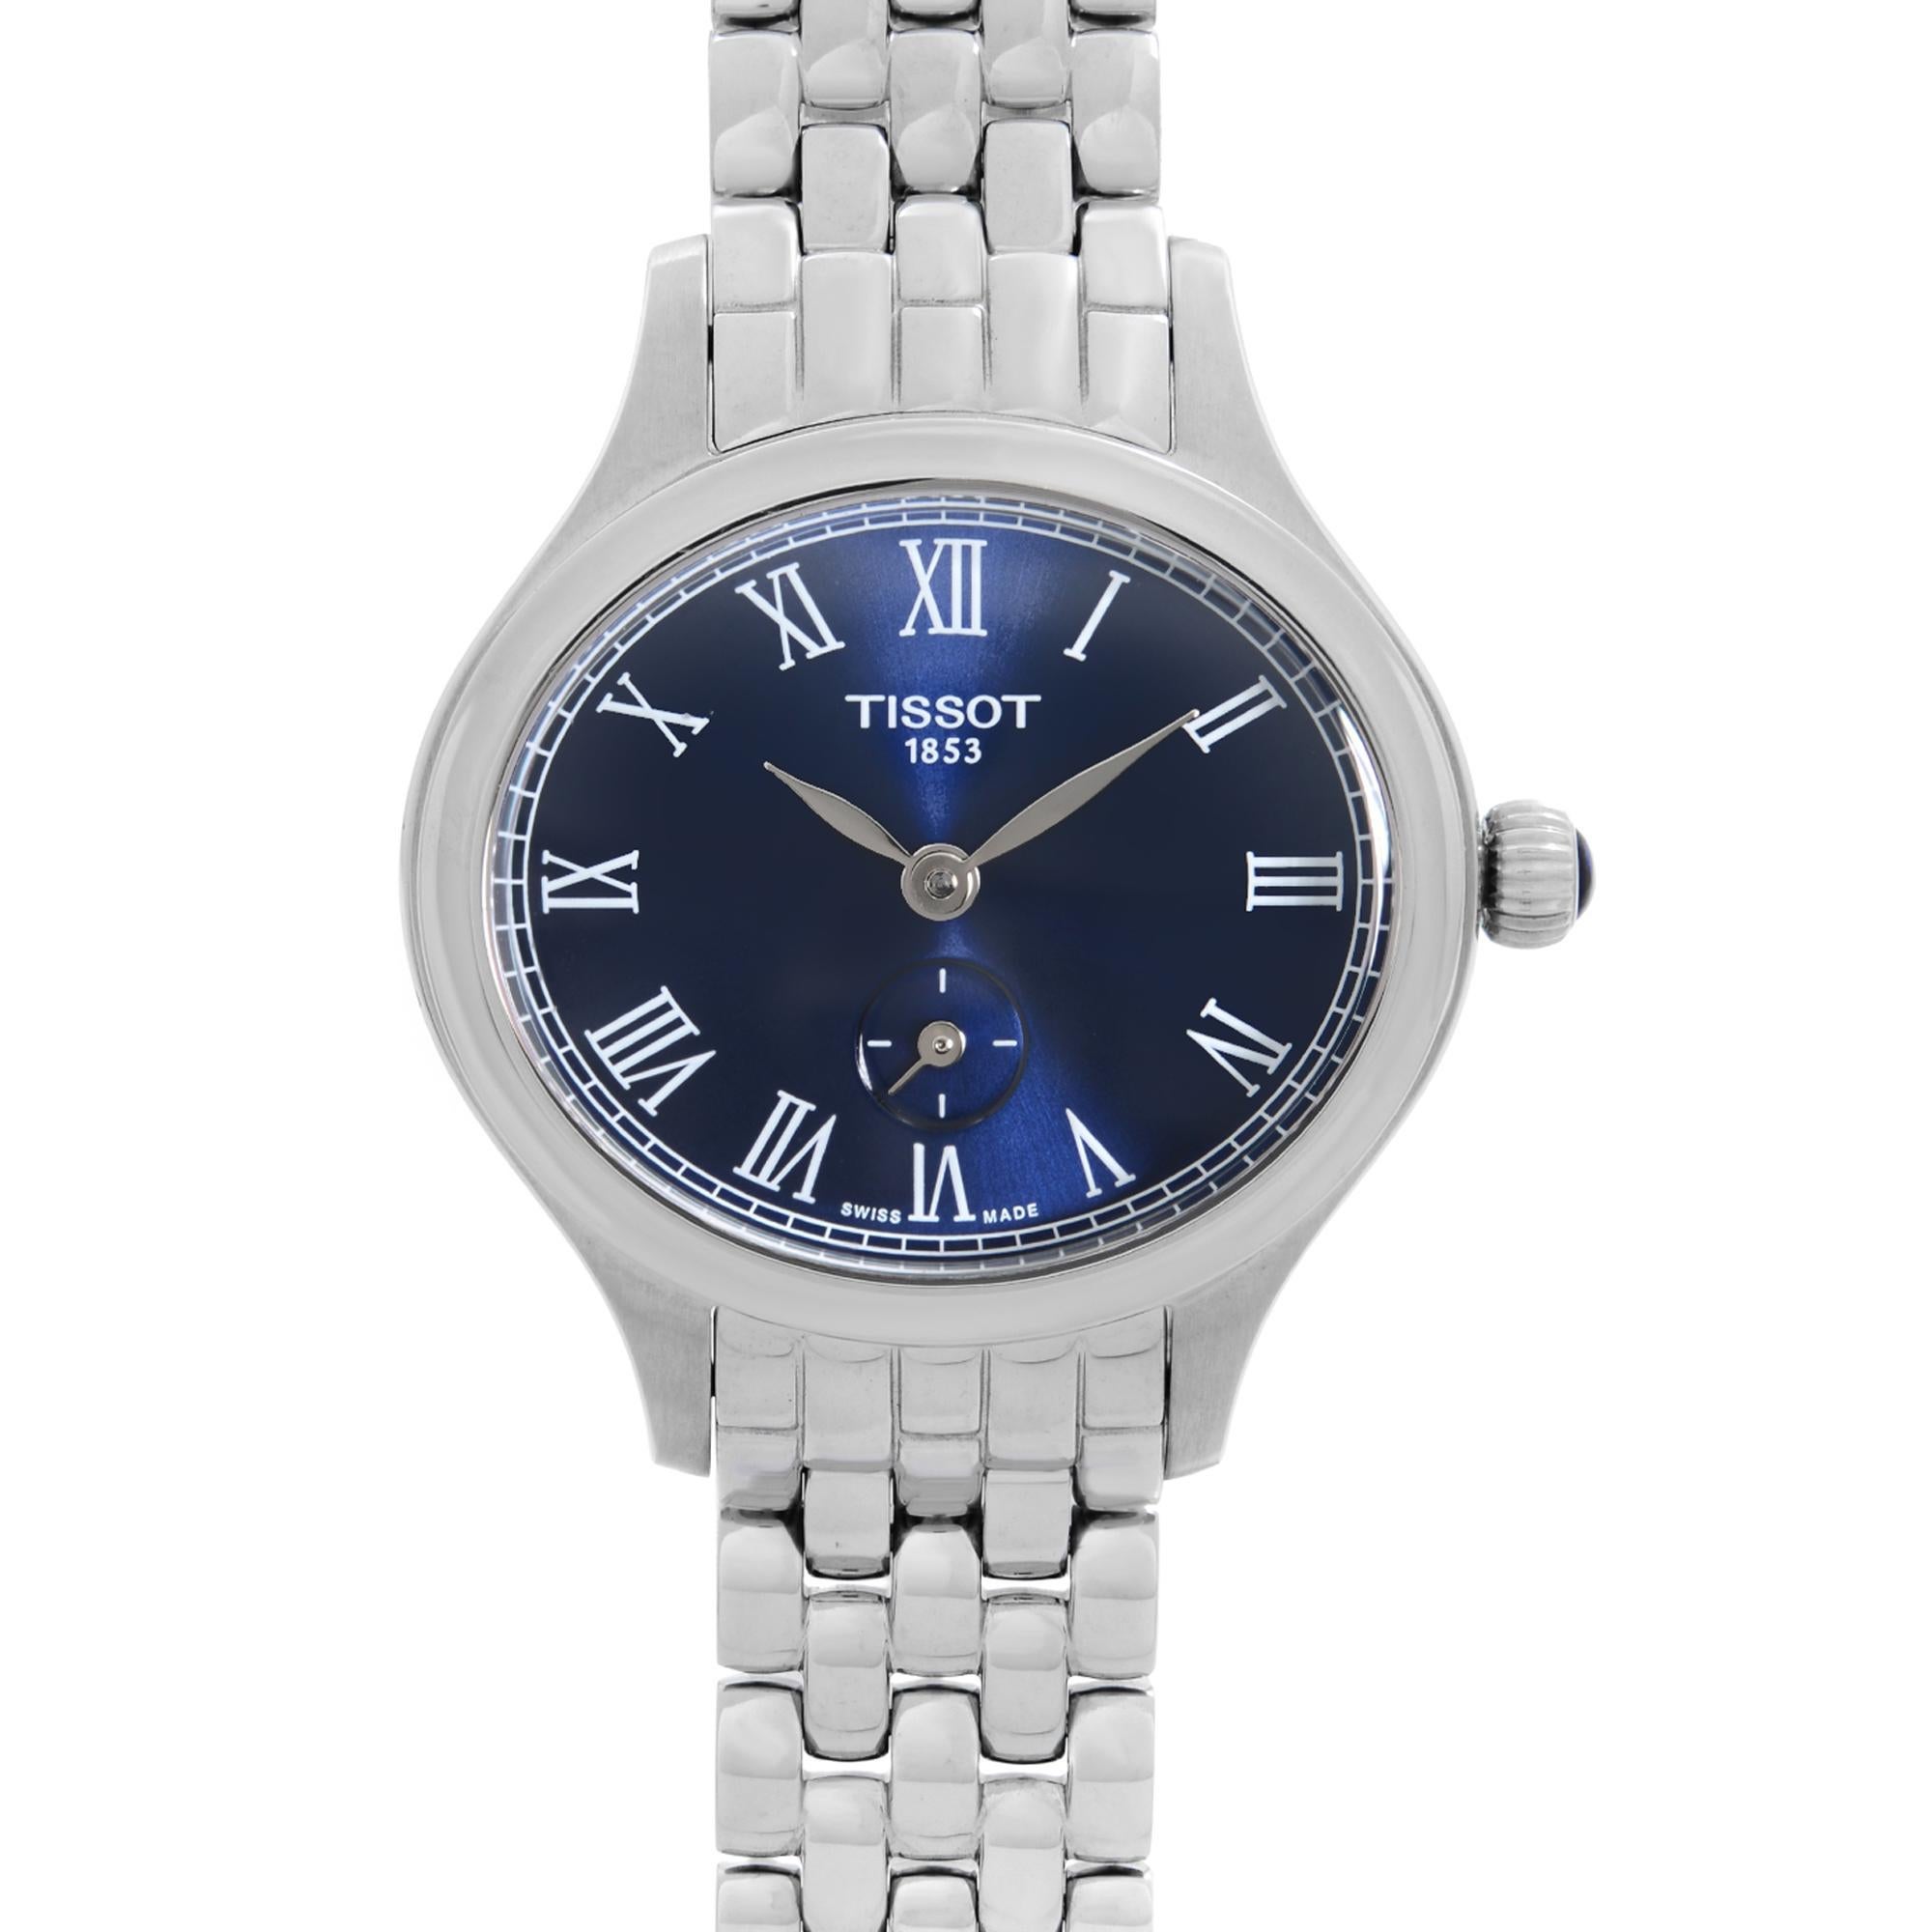 Display Model Tissot Bella Ora Piccola Steel Blue Dial Ladies Quartz Watch T103.110.11.043.00. This Beautiful Ladies Timepiece is Powered By a Quartz (Battery) Movement and Features: Stainless Steel Case and Bracelet. Fixed Stainless Steel Bezel.